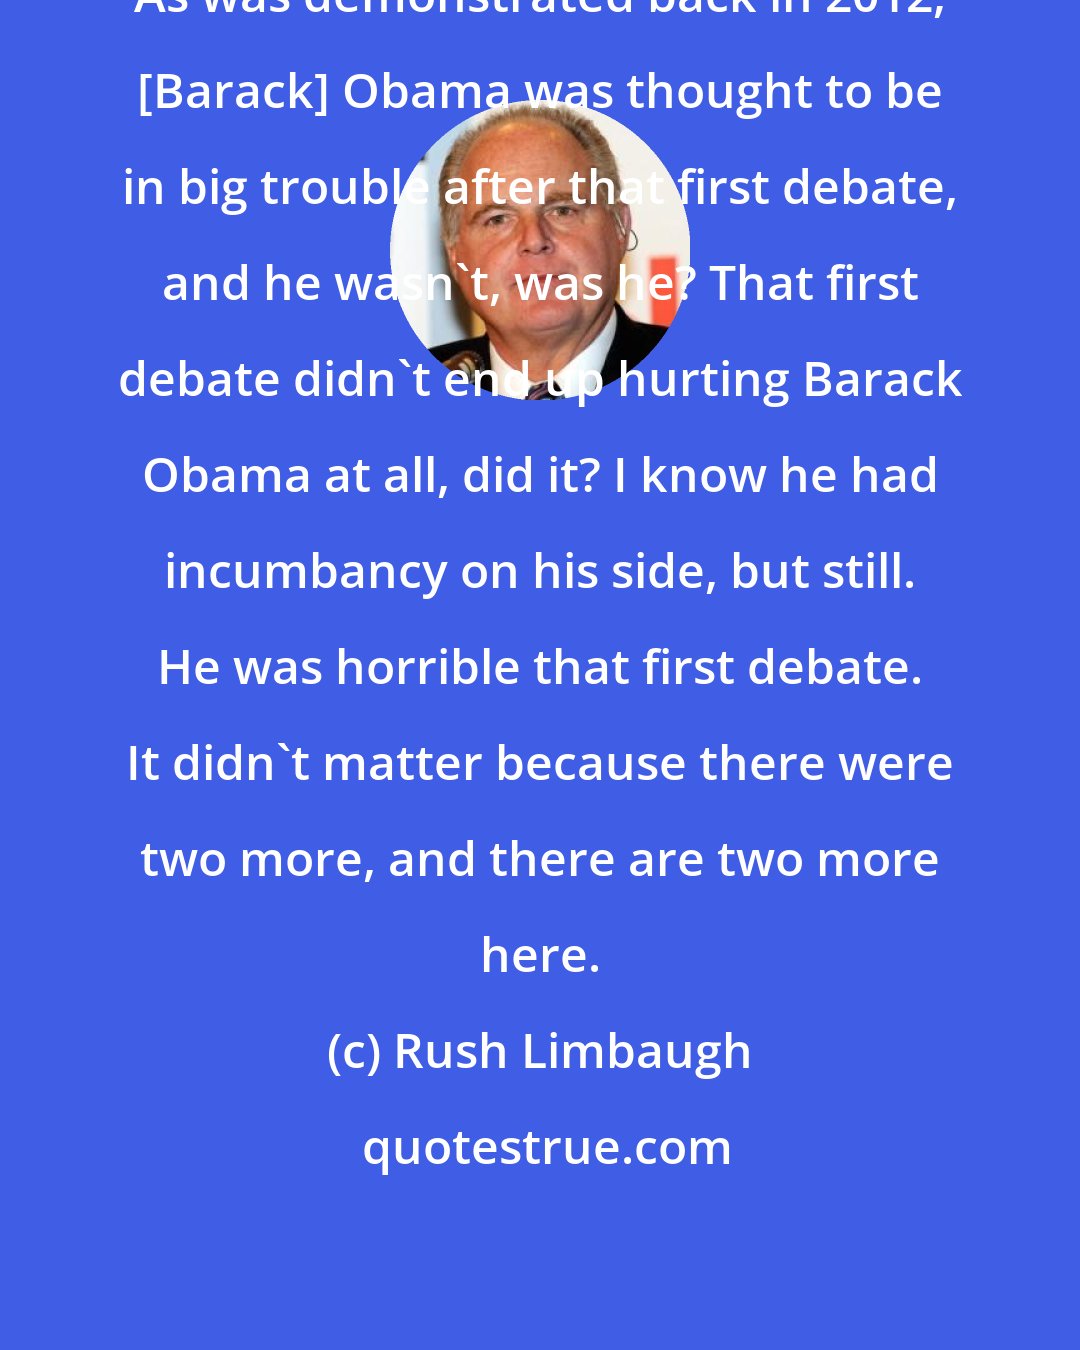 Rush Limbaugh: As was demonstrated back in 2012, [Barack] Obama was thought to be in big trouble after that first debate, and he wasn't, was he? That first debate didn't end up hurting Barack Obama at all, did it? I know he had incumbancy on his side, but still. He was horrible that first debate. It didn't matter because there were two more, and there are two more here.